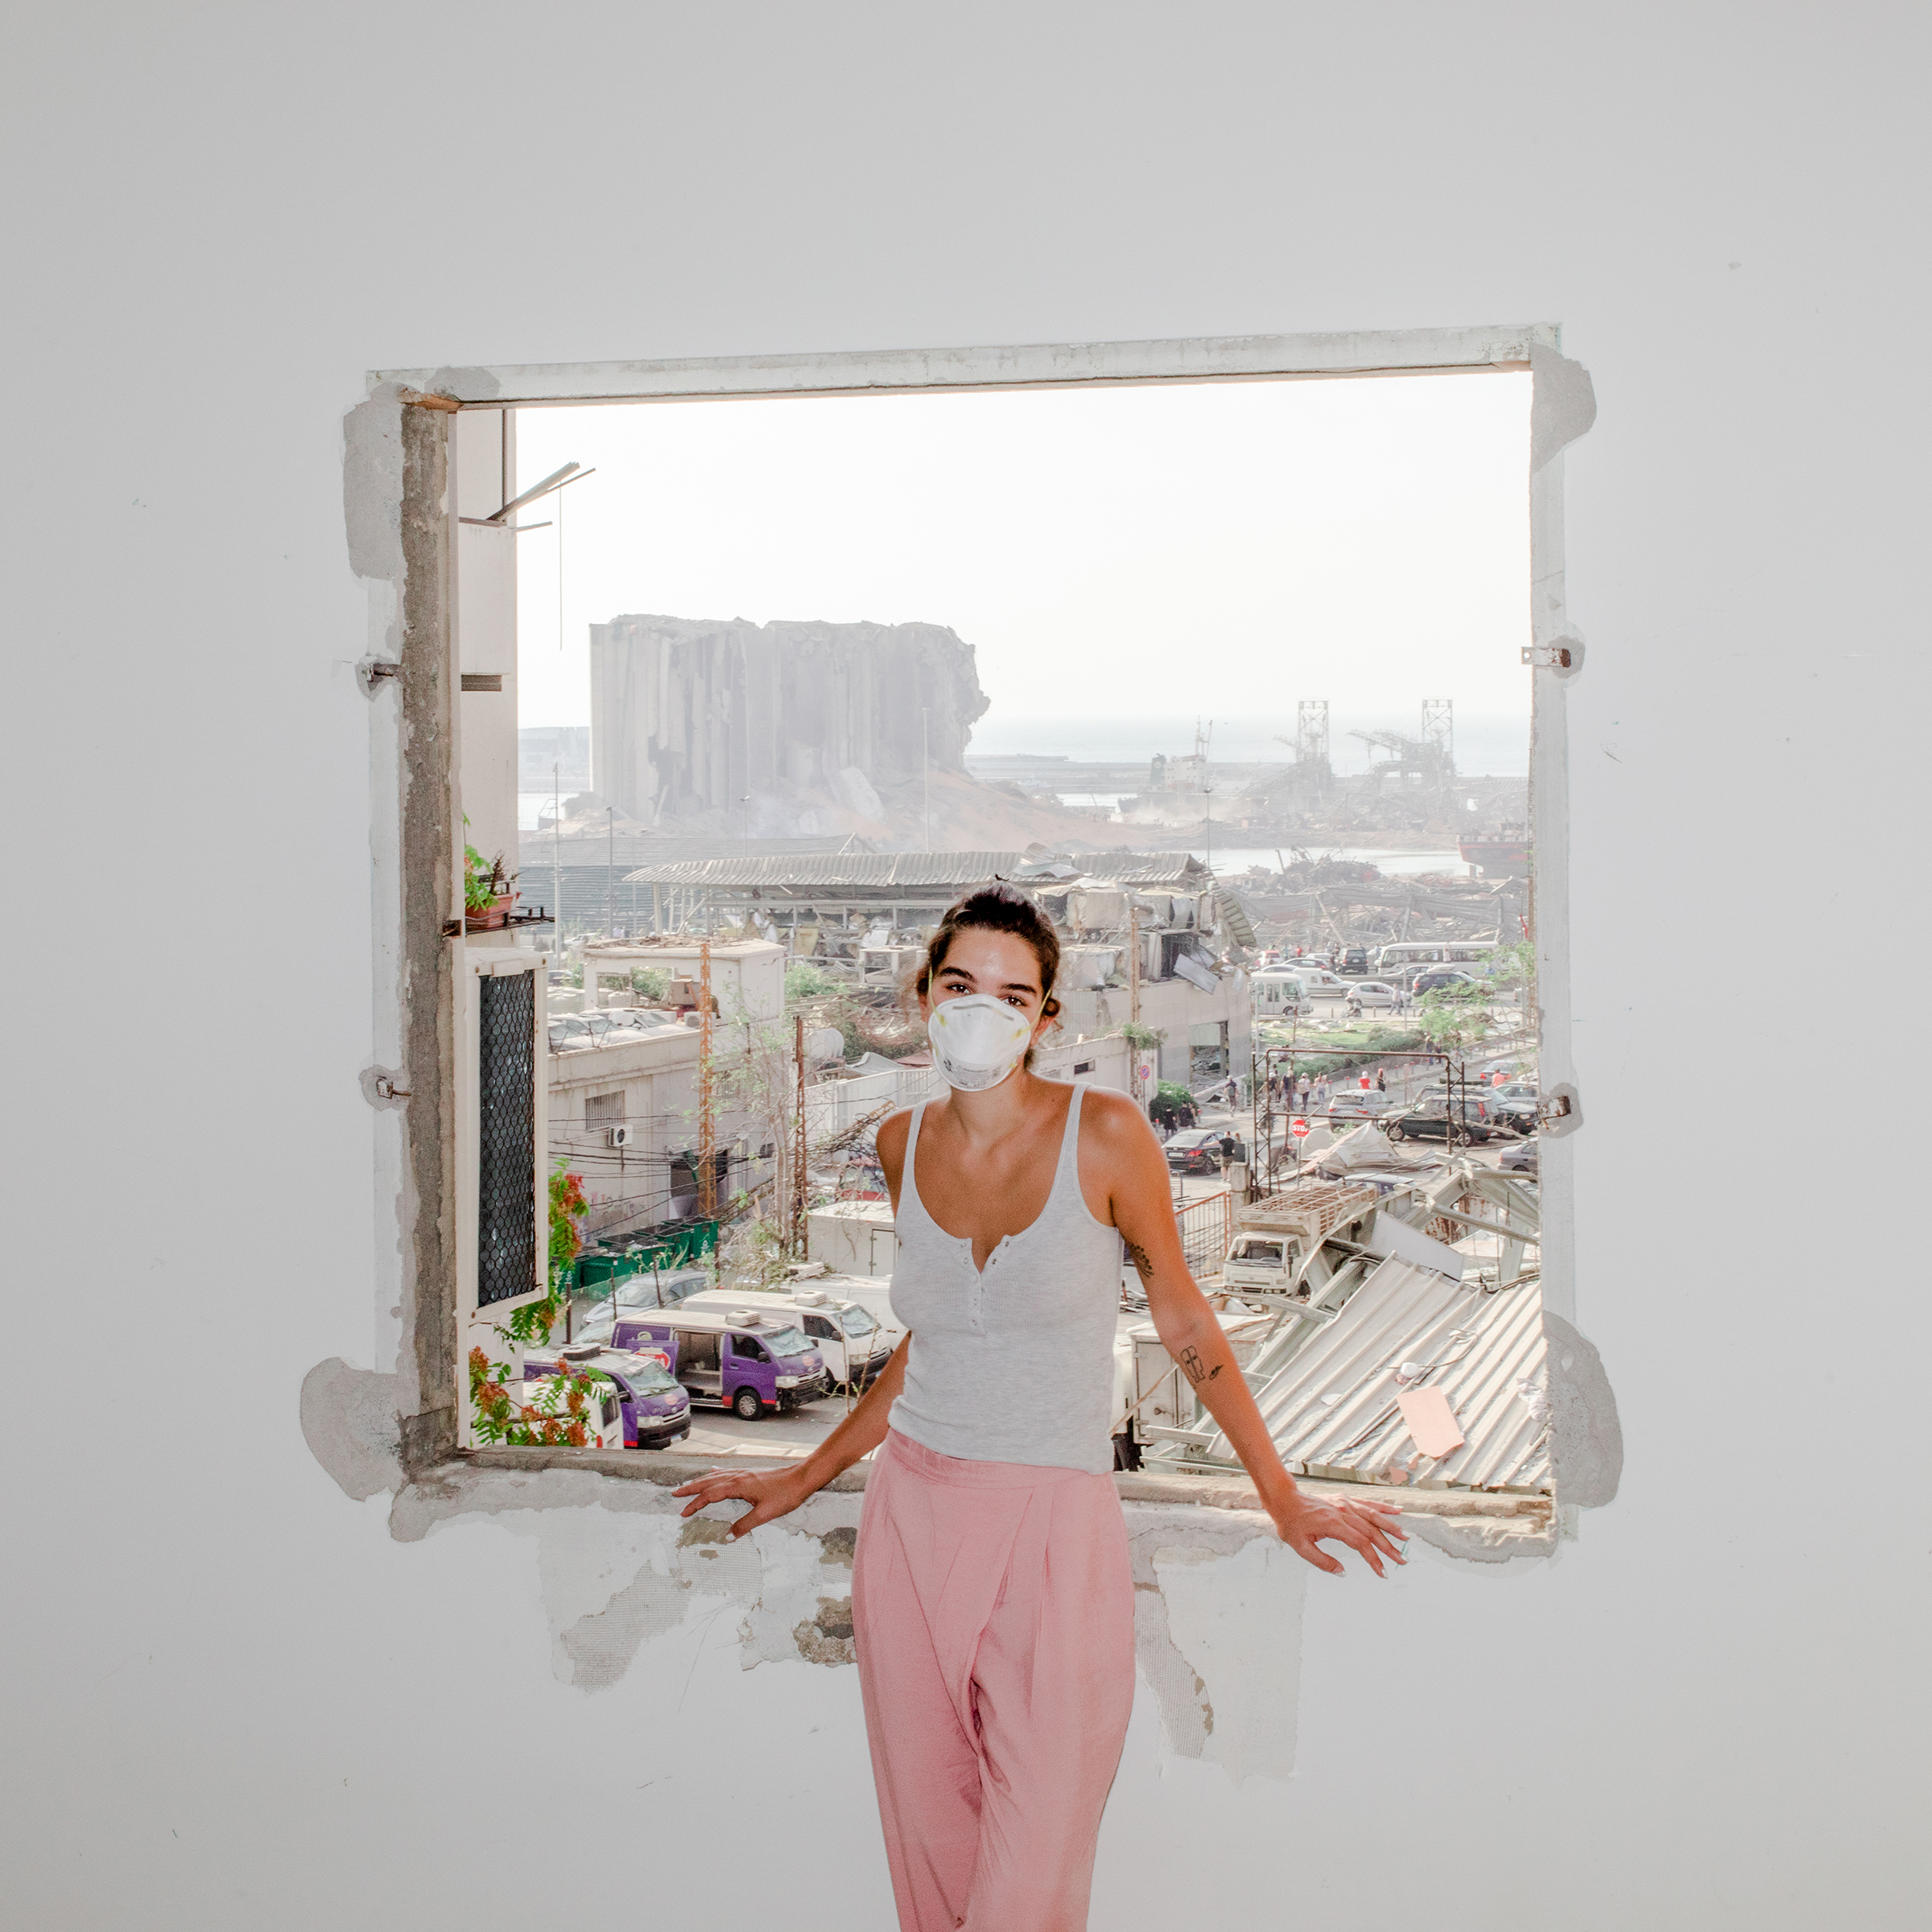 <strong>Nour Saliba</strong> stands in her apartment in the Mar Mikhael area of Beirut on Aug. 6, two days after the deadly explosion at the city’s port, seen through her blown-out window. "<a href="https://time.com/5879192/beirut-explosion-lebanon-reform/">After the Explosion</a>," Aug. 31 issue. (Myriam Boulos for TIME)